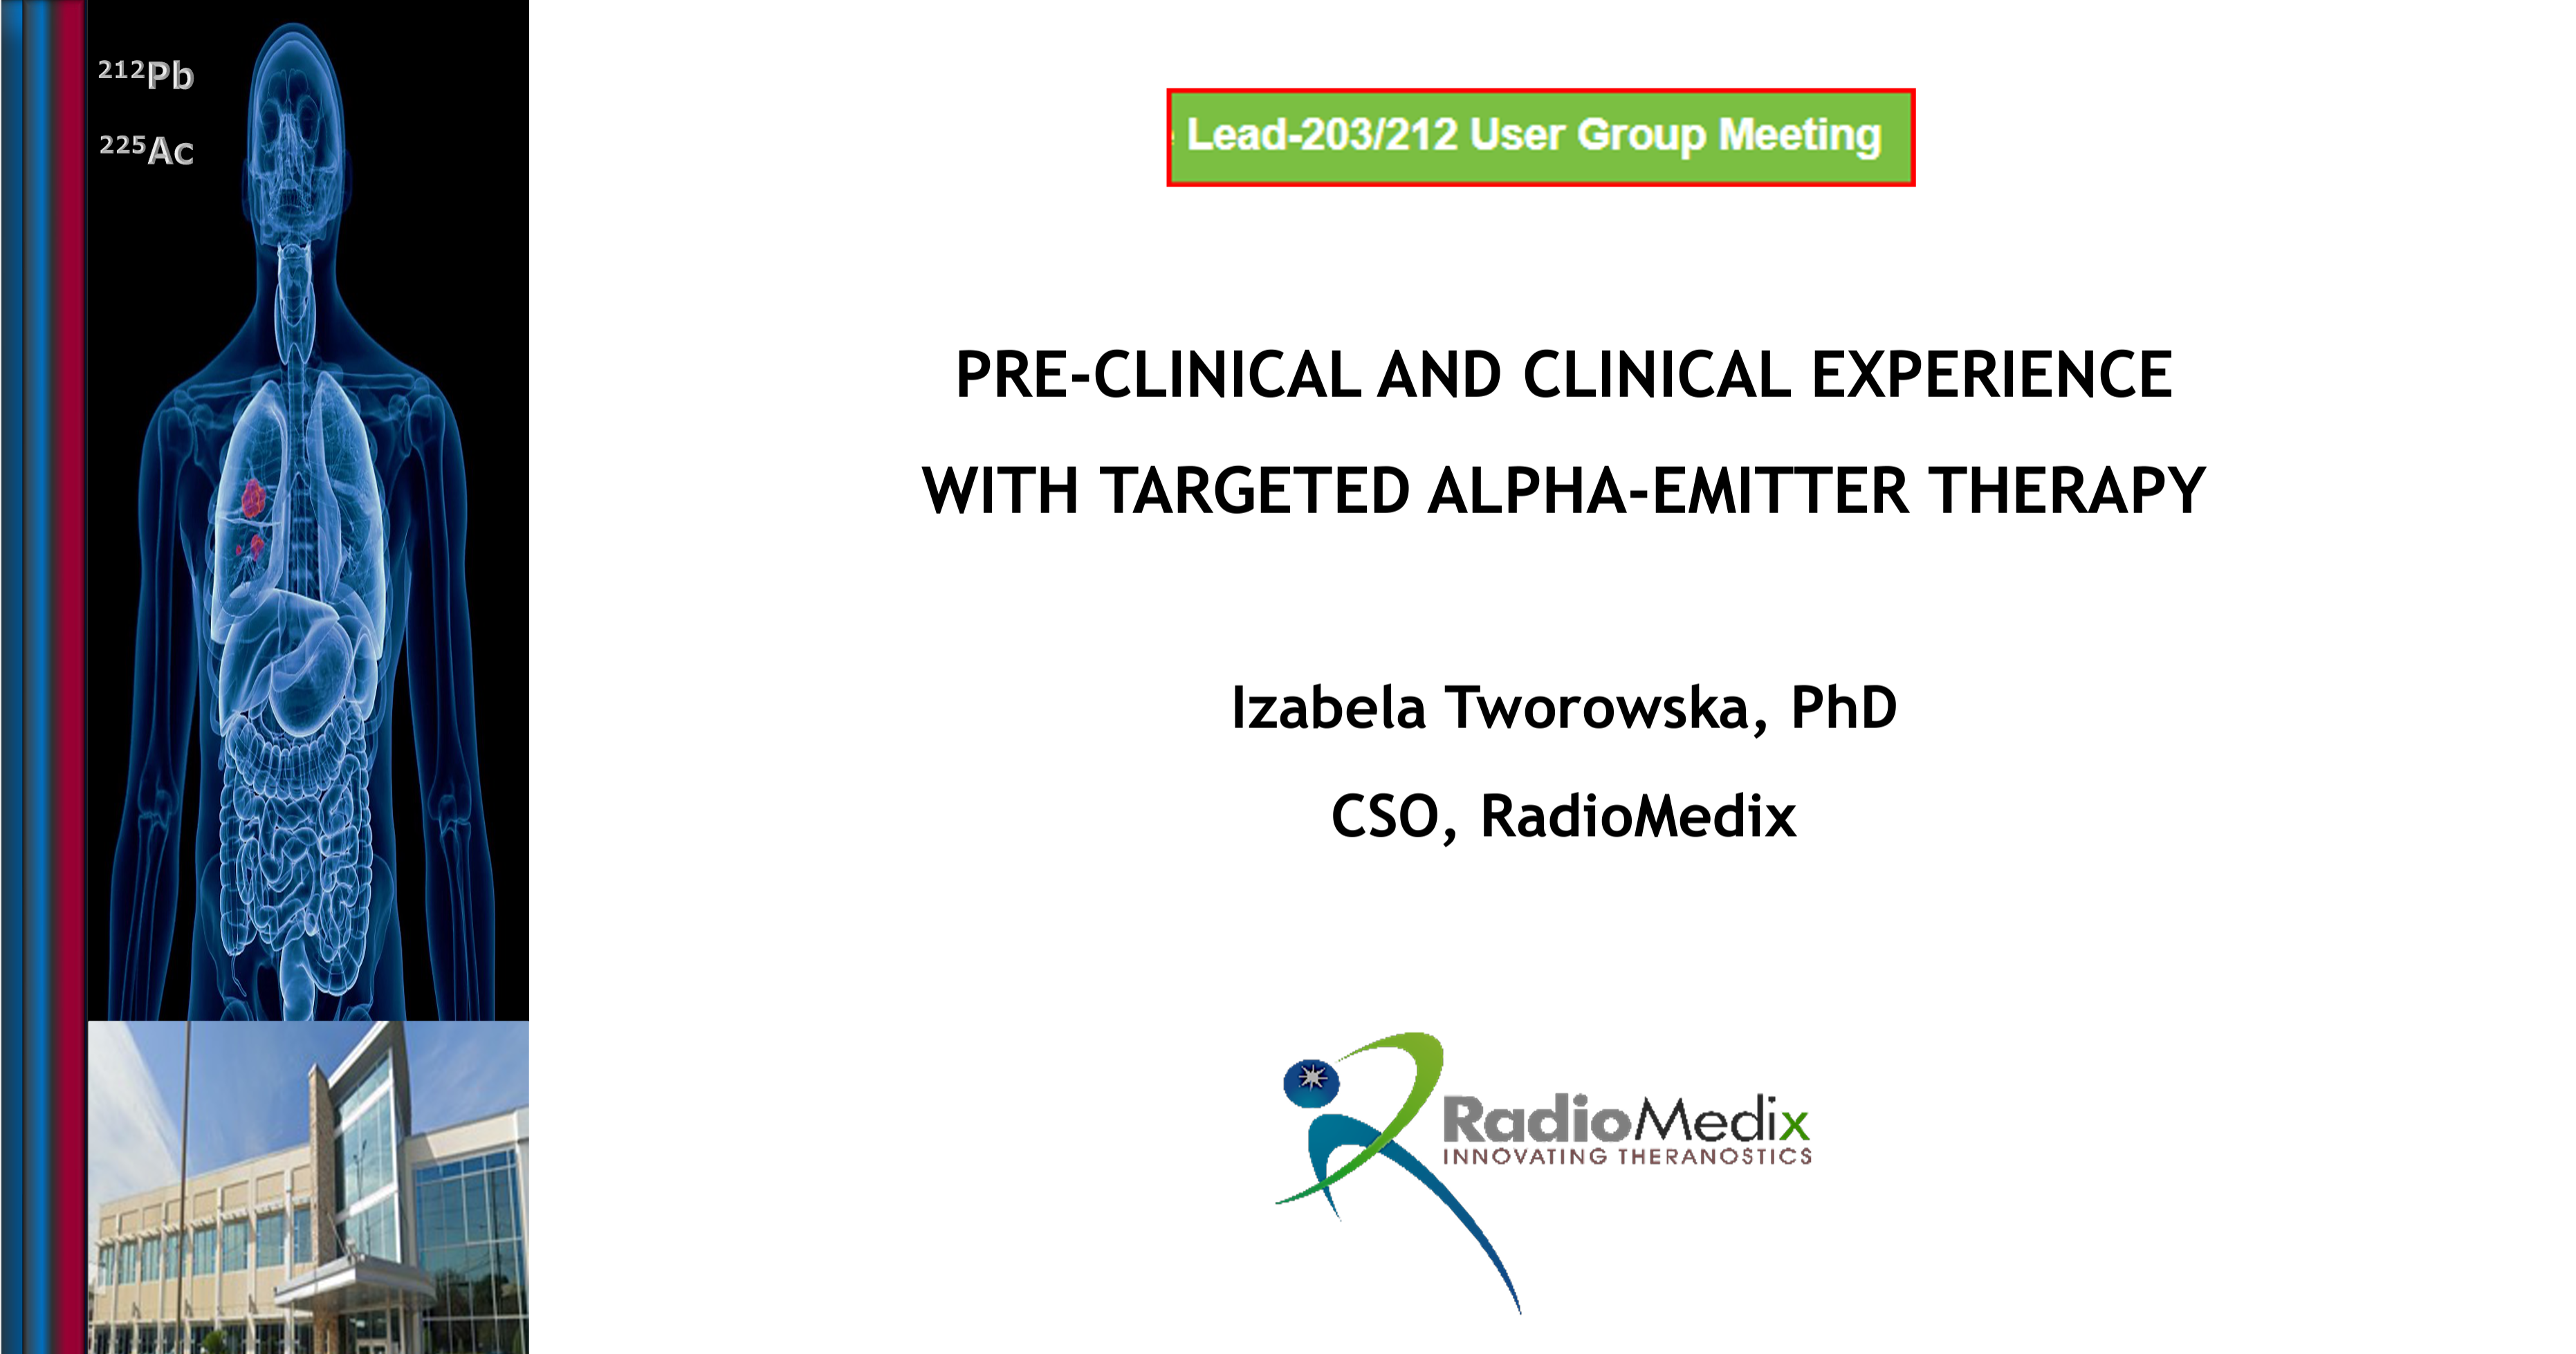 PRE-CLINICAL AND CLINICAL EXPERIENCE WITH TARGETED ALPHA-EMITTER THERAPY